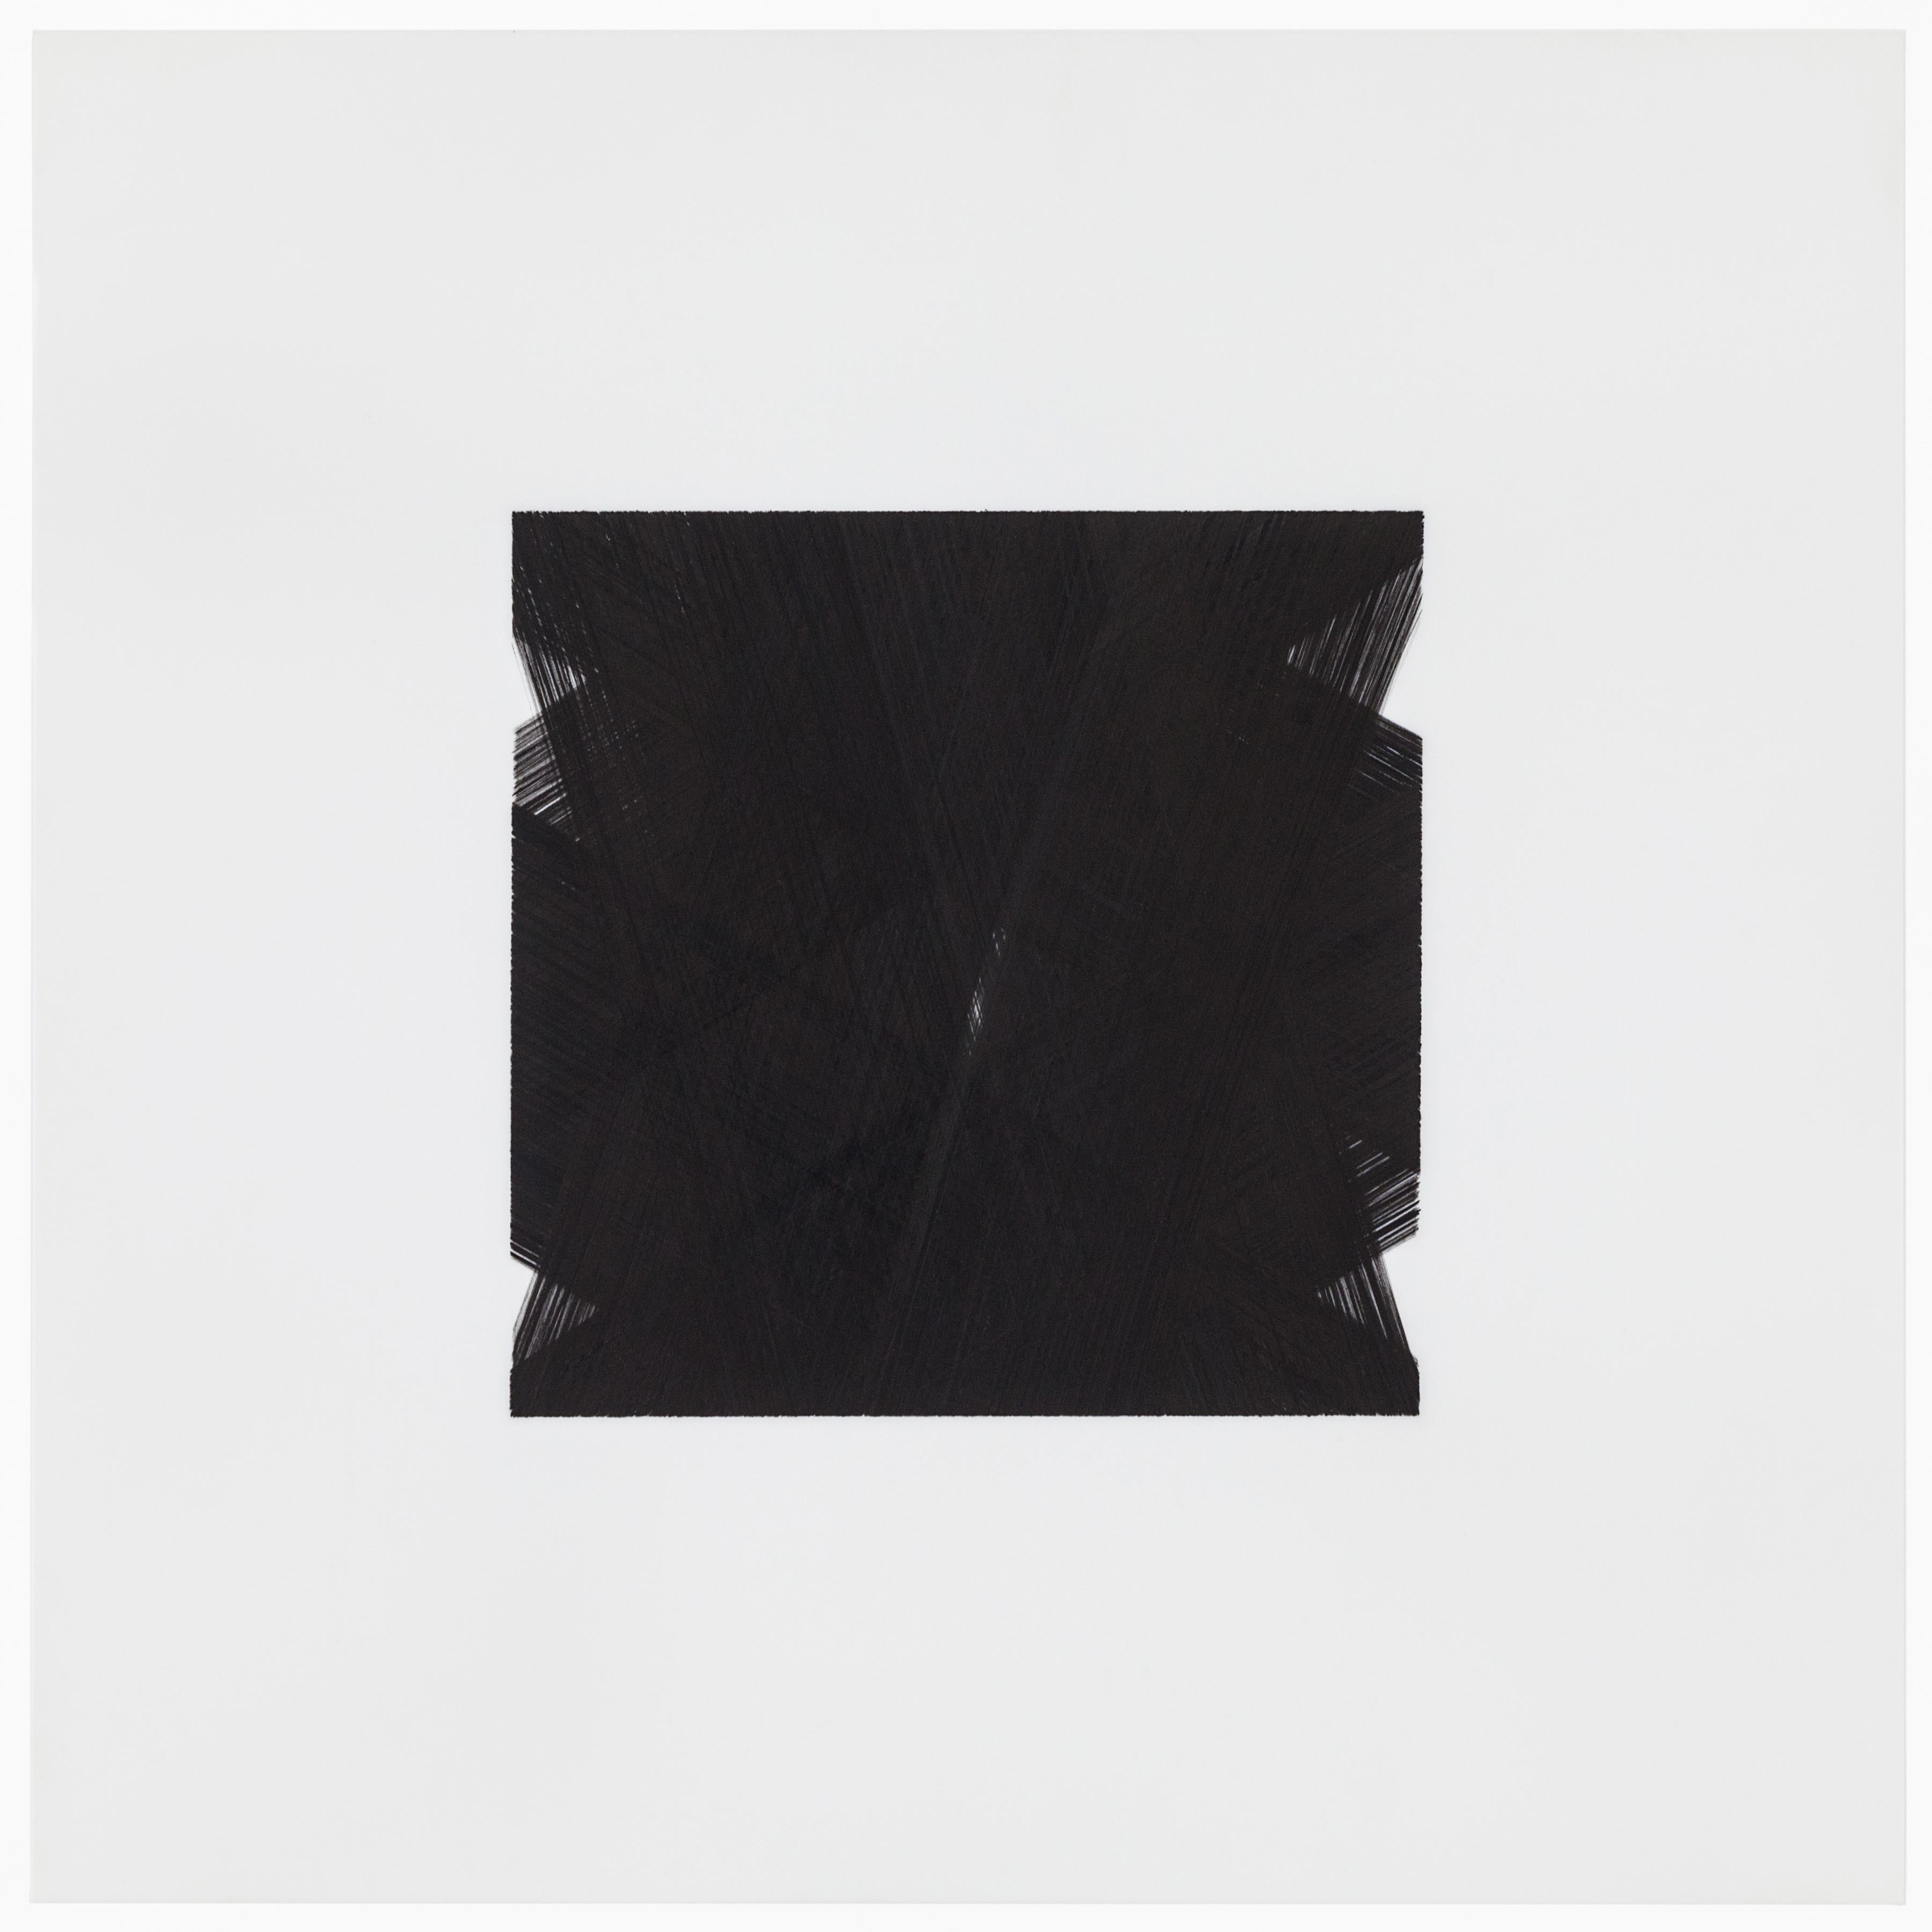 American Patrick Carrara Black Ink on Mylar Drawings, Appearance Series, 2013 - 2015 For Sale